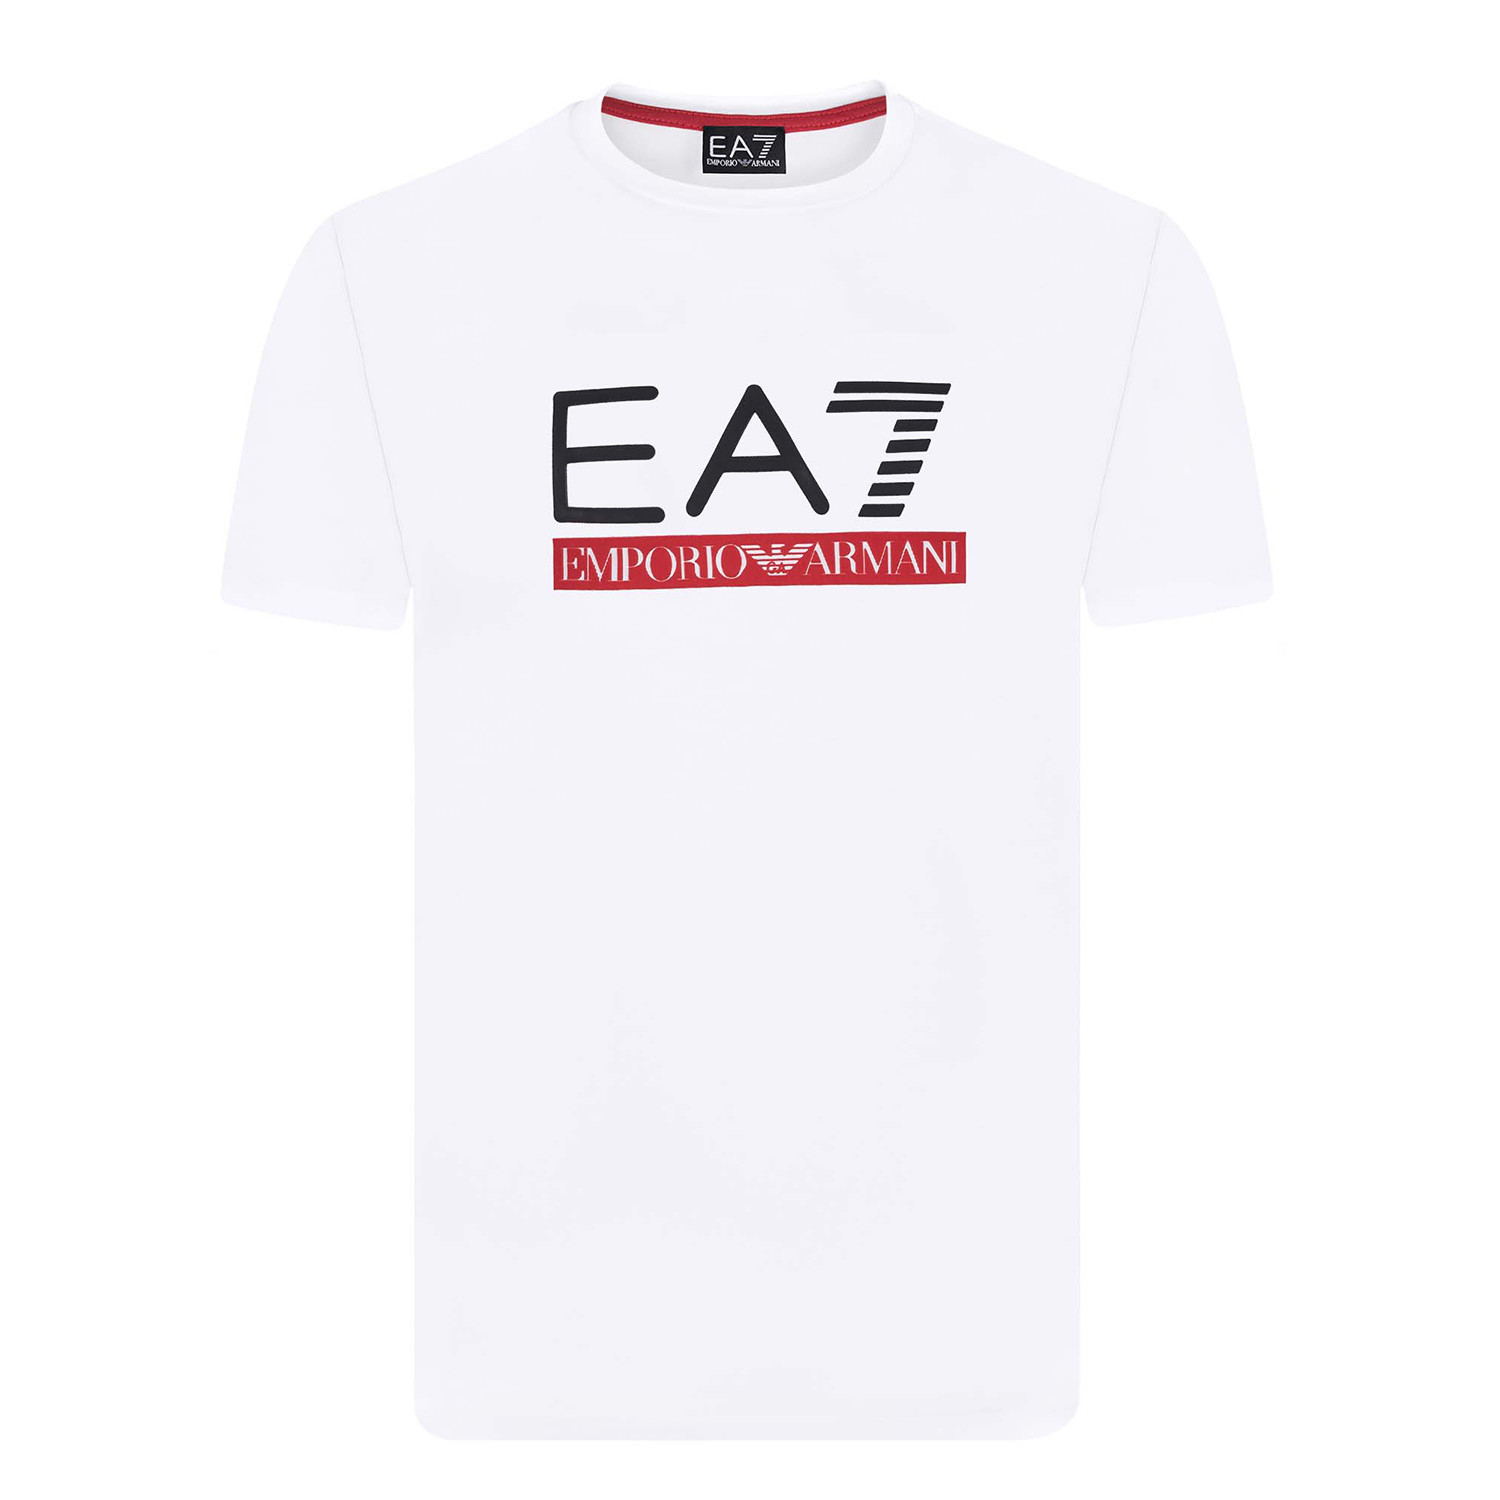 ea7 red t shirt